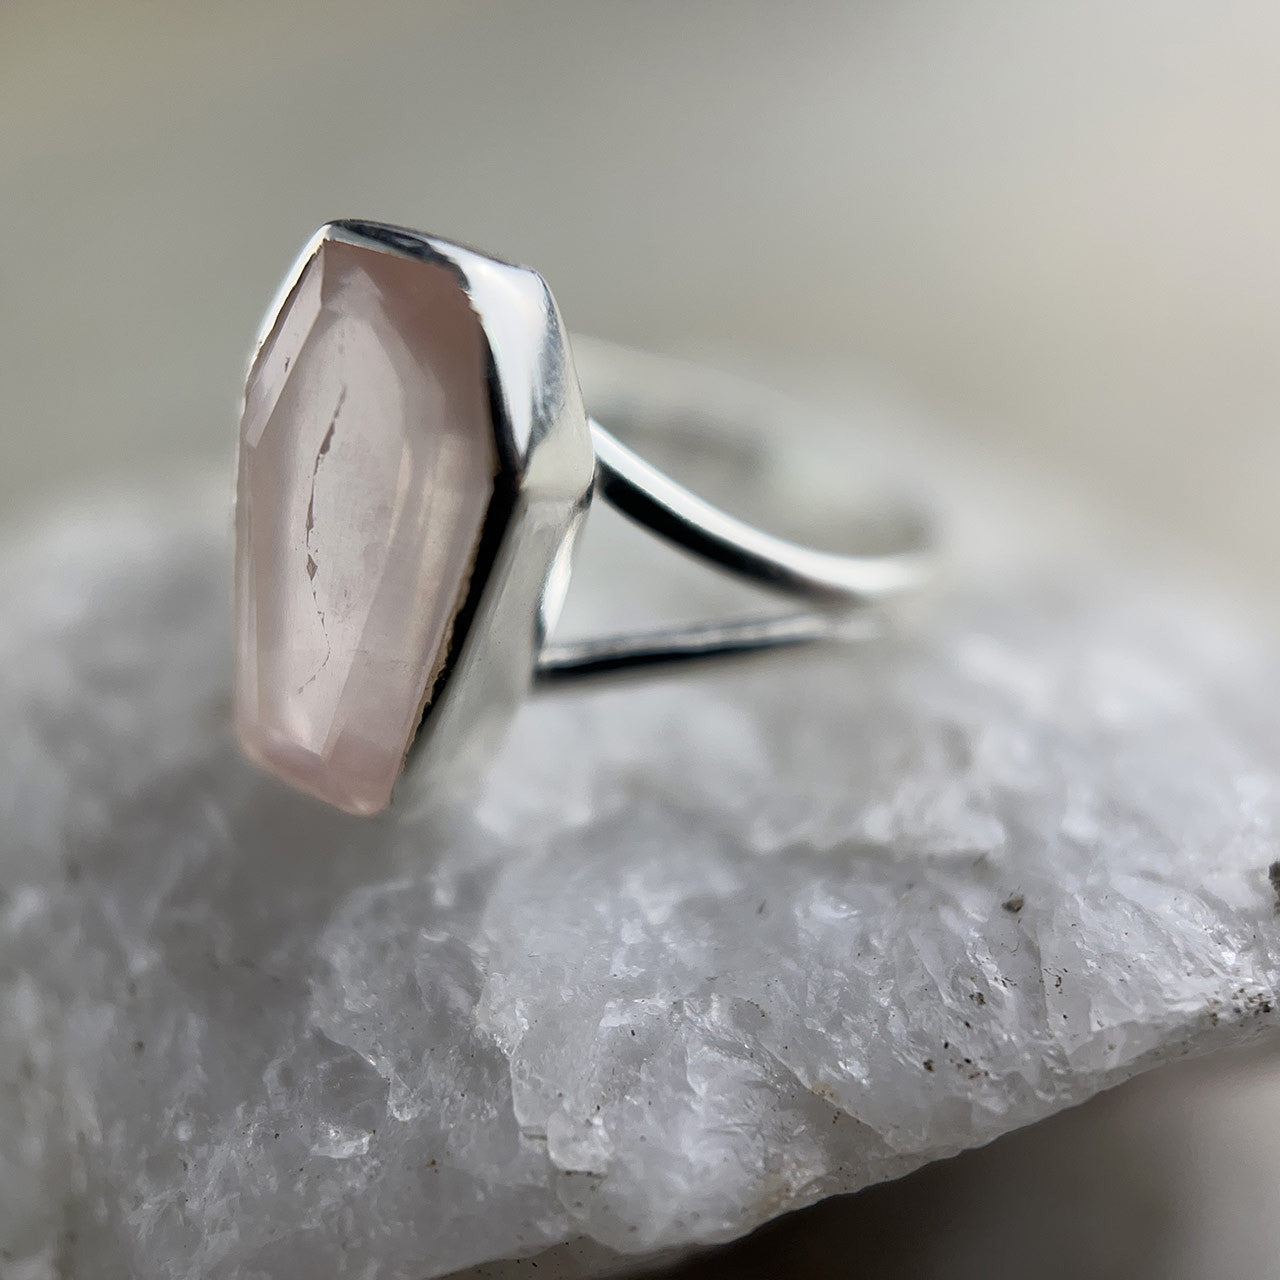 Vintage Gothic Style Hip Hop Coffin Self Defence Ring With Imitation  Zirconium For Men And Women G1125 From Sihuai05, $6.55 | DHgate.Com